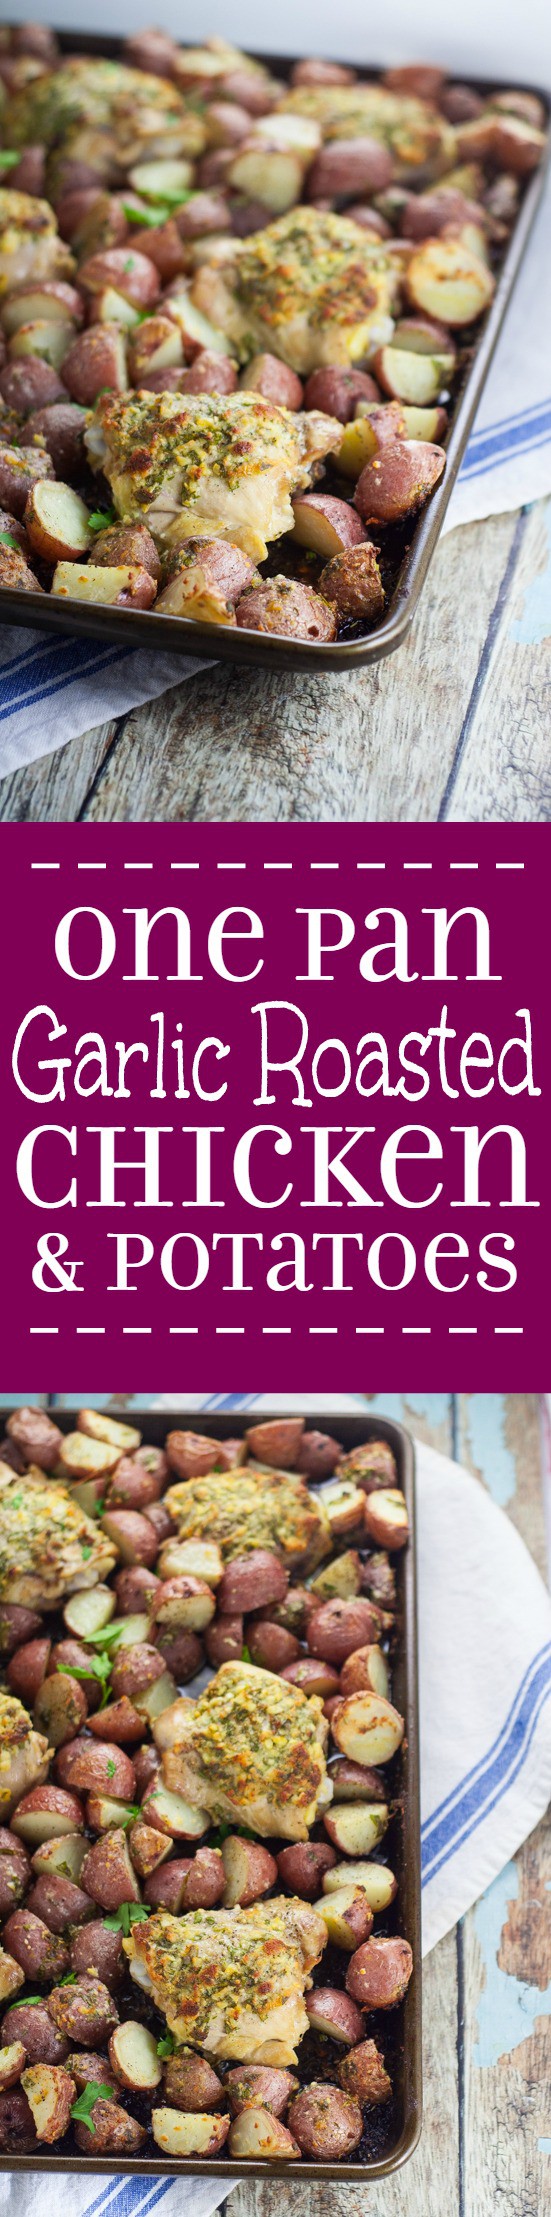 One Pan Garlic Chicken and Potatoes is a perfect easy family dinner recipe.  Easy, savory One Pan Garlic Roasted Chicken and Potatoes is a full meal, roasted in the oven all at once. So easy and equally delicious! Wow! This looks fabulous!